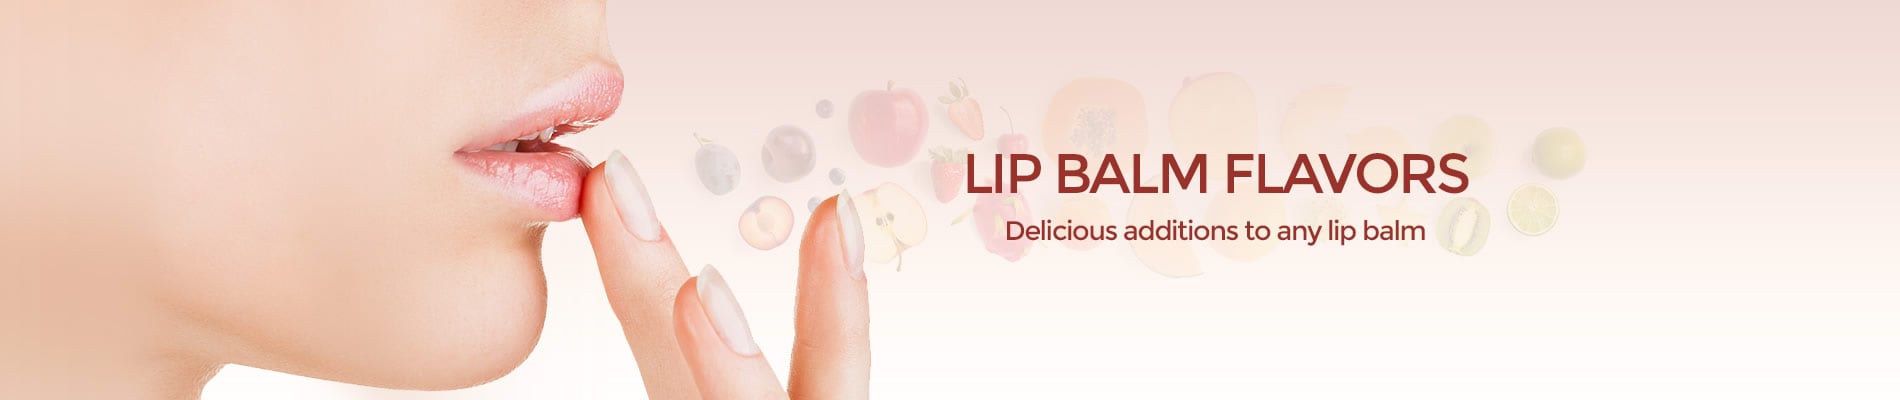 Lip Balm Flavors from New Directions Aromatics